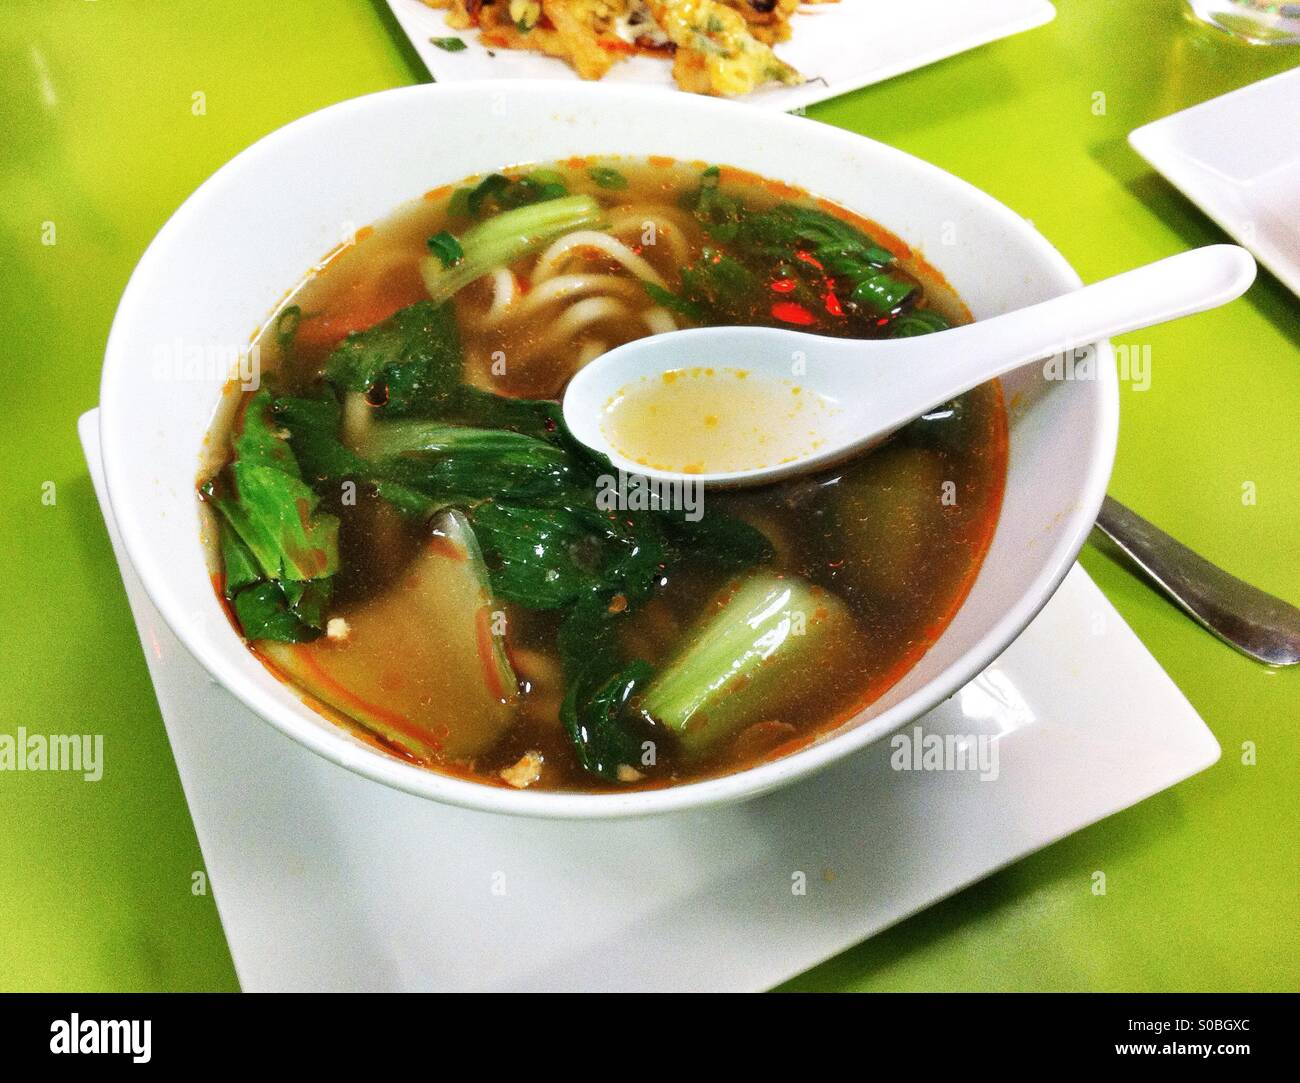 white bowl of udon noodles with vegetables Stock Photo